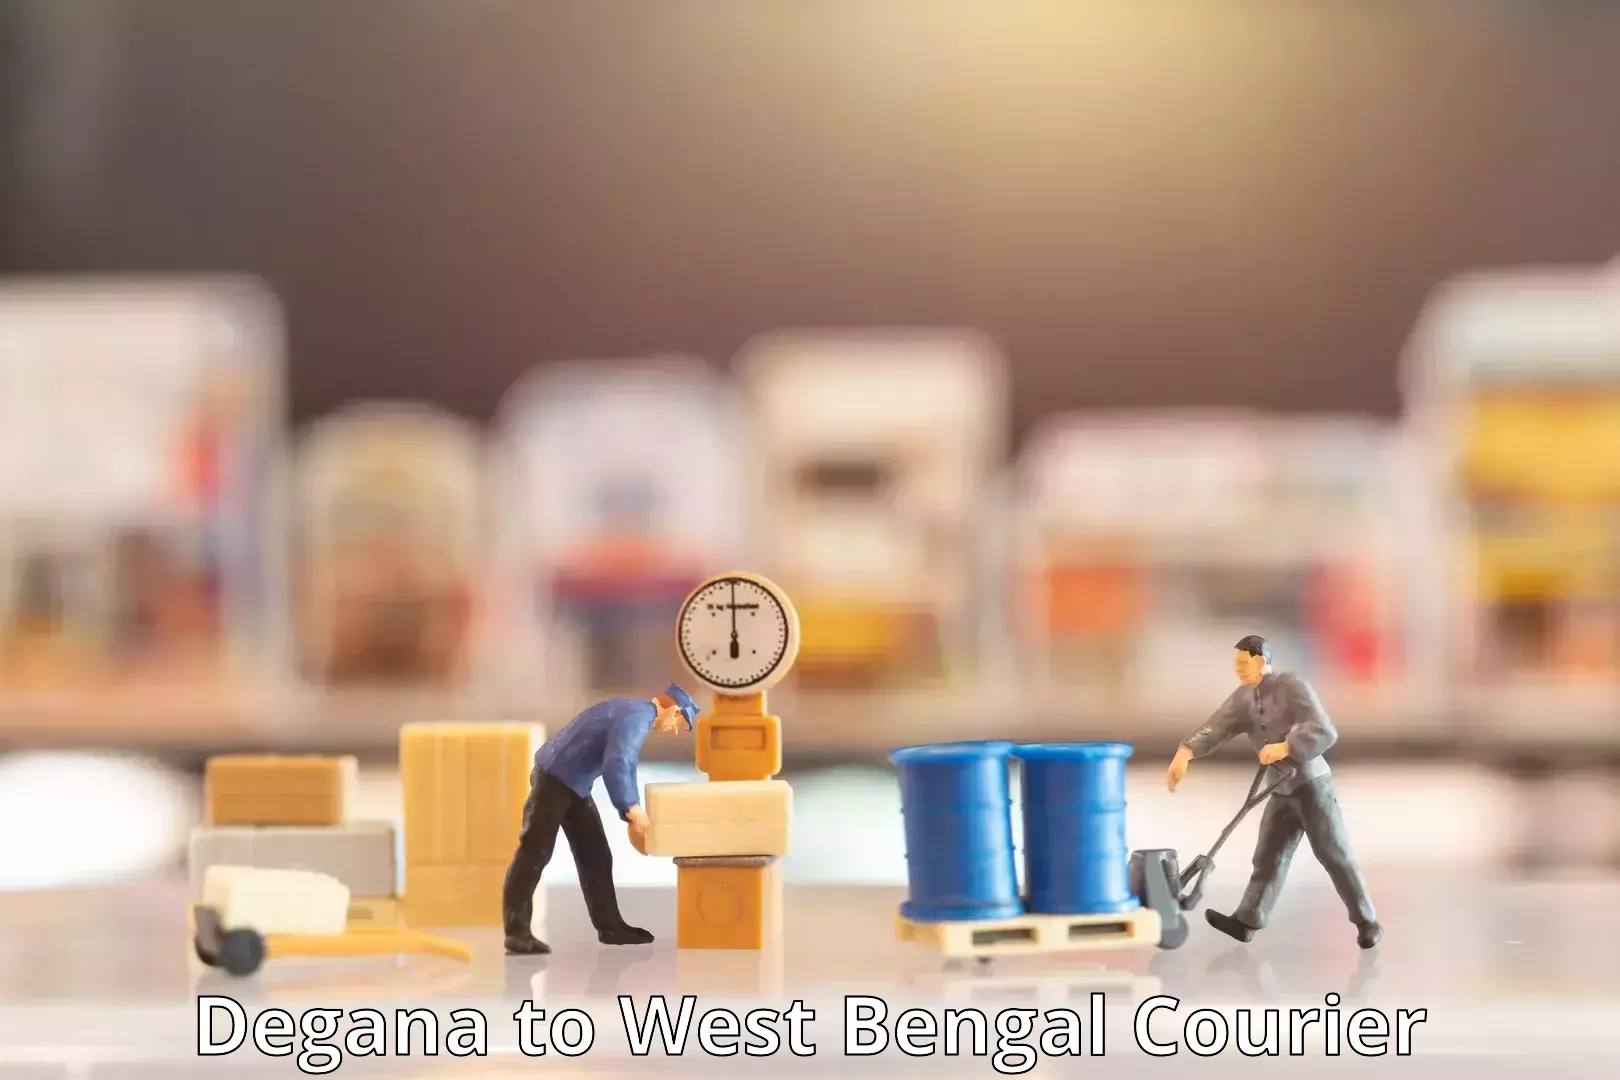 Courier service partnerships Degana to West Bengal